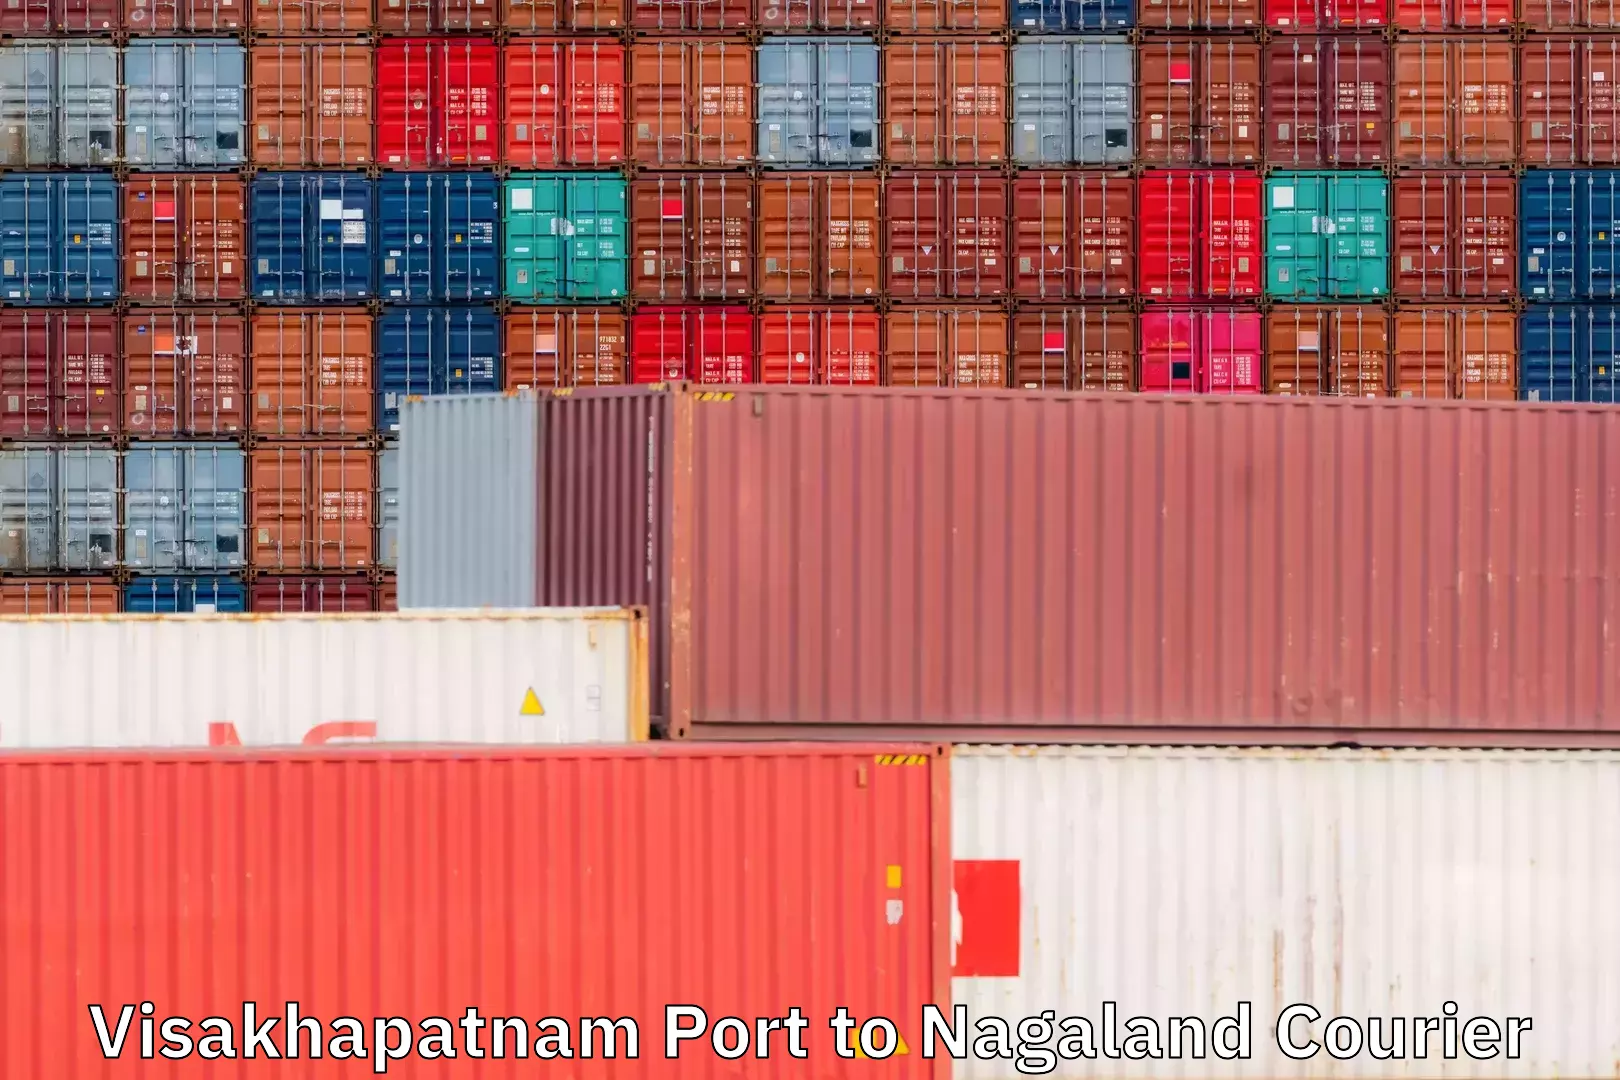 Reliable logistics providers in Visakhapatnam Port to Nagaland